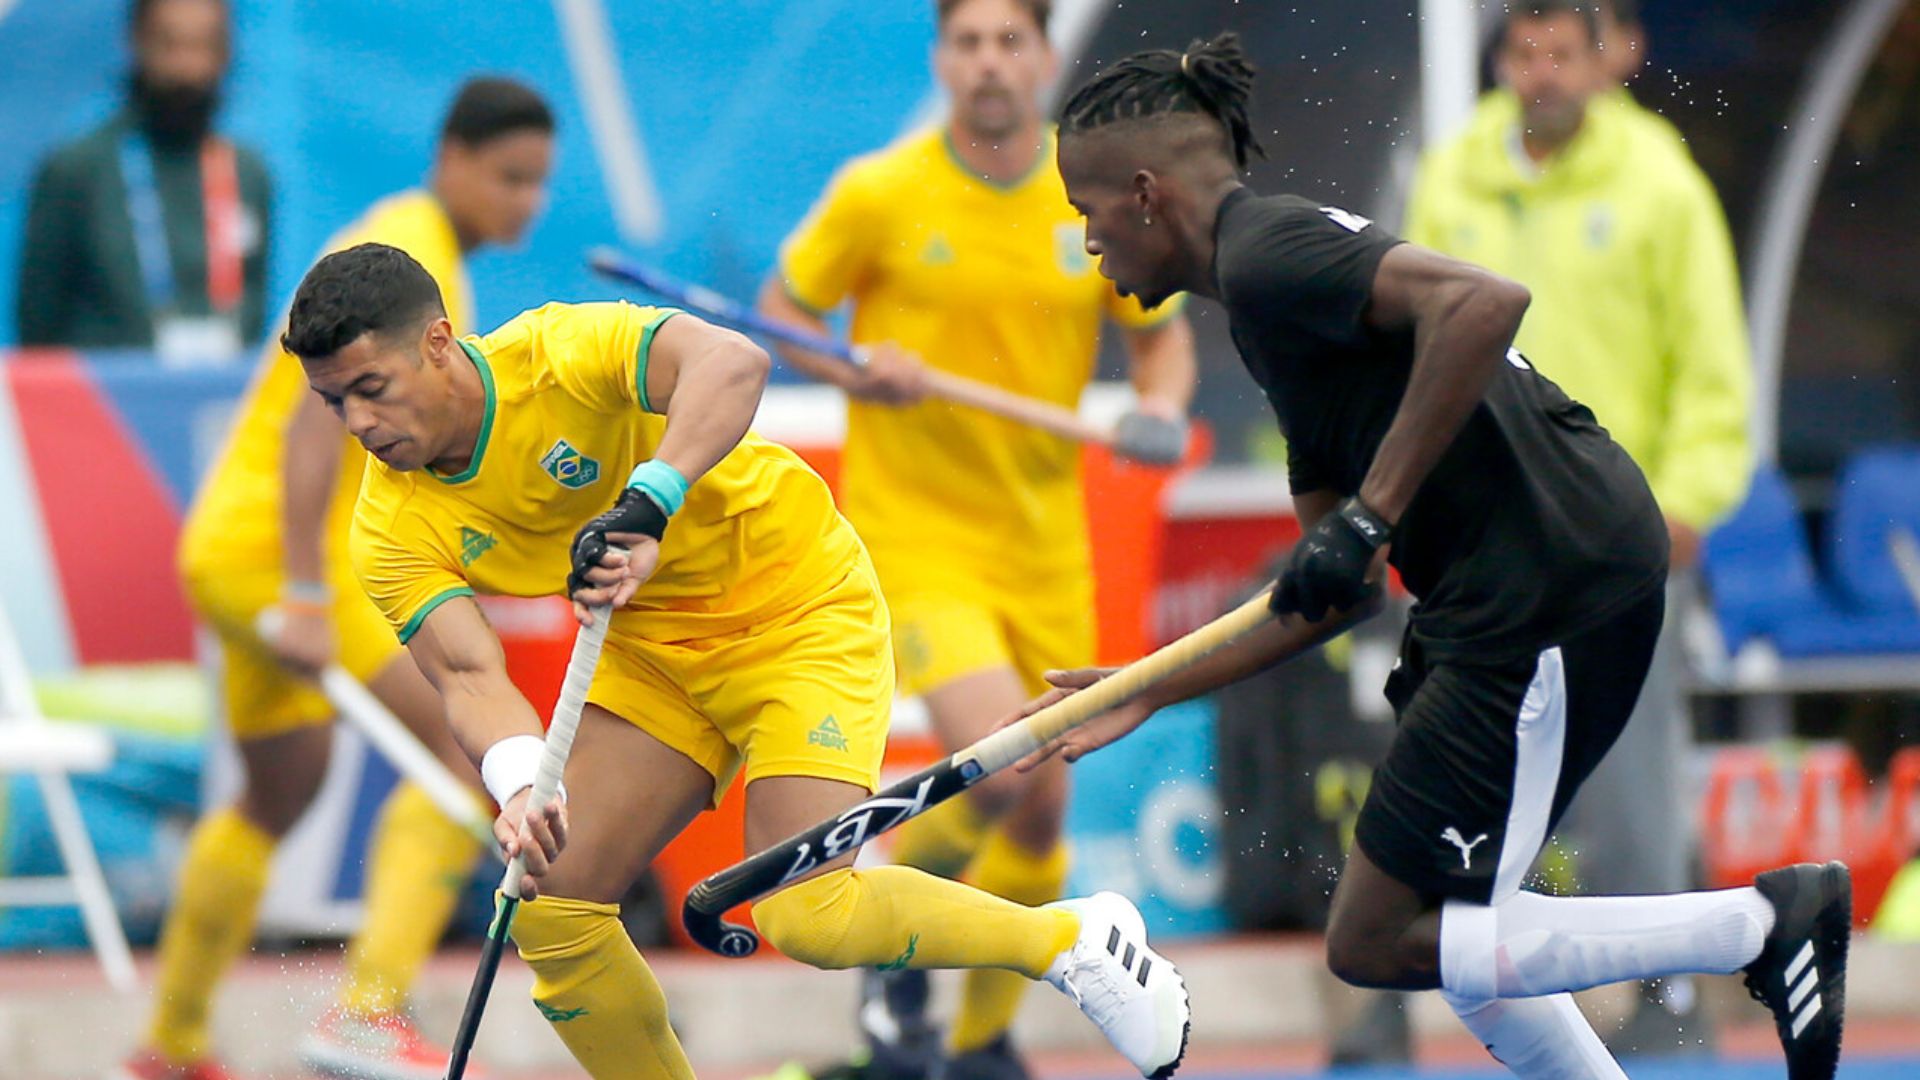 Brazil rebounds in male's hockey after defeating Trinidad and Tobago